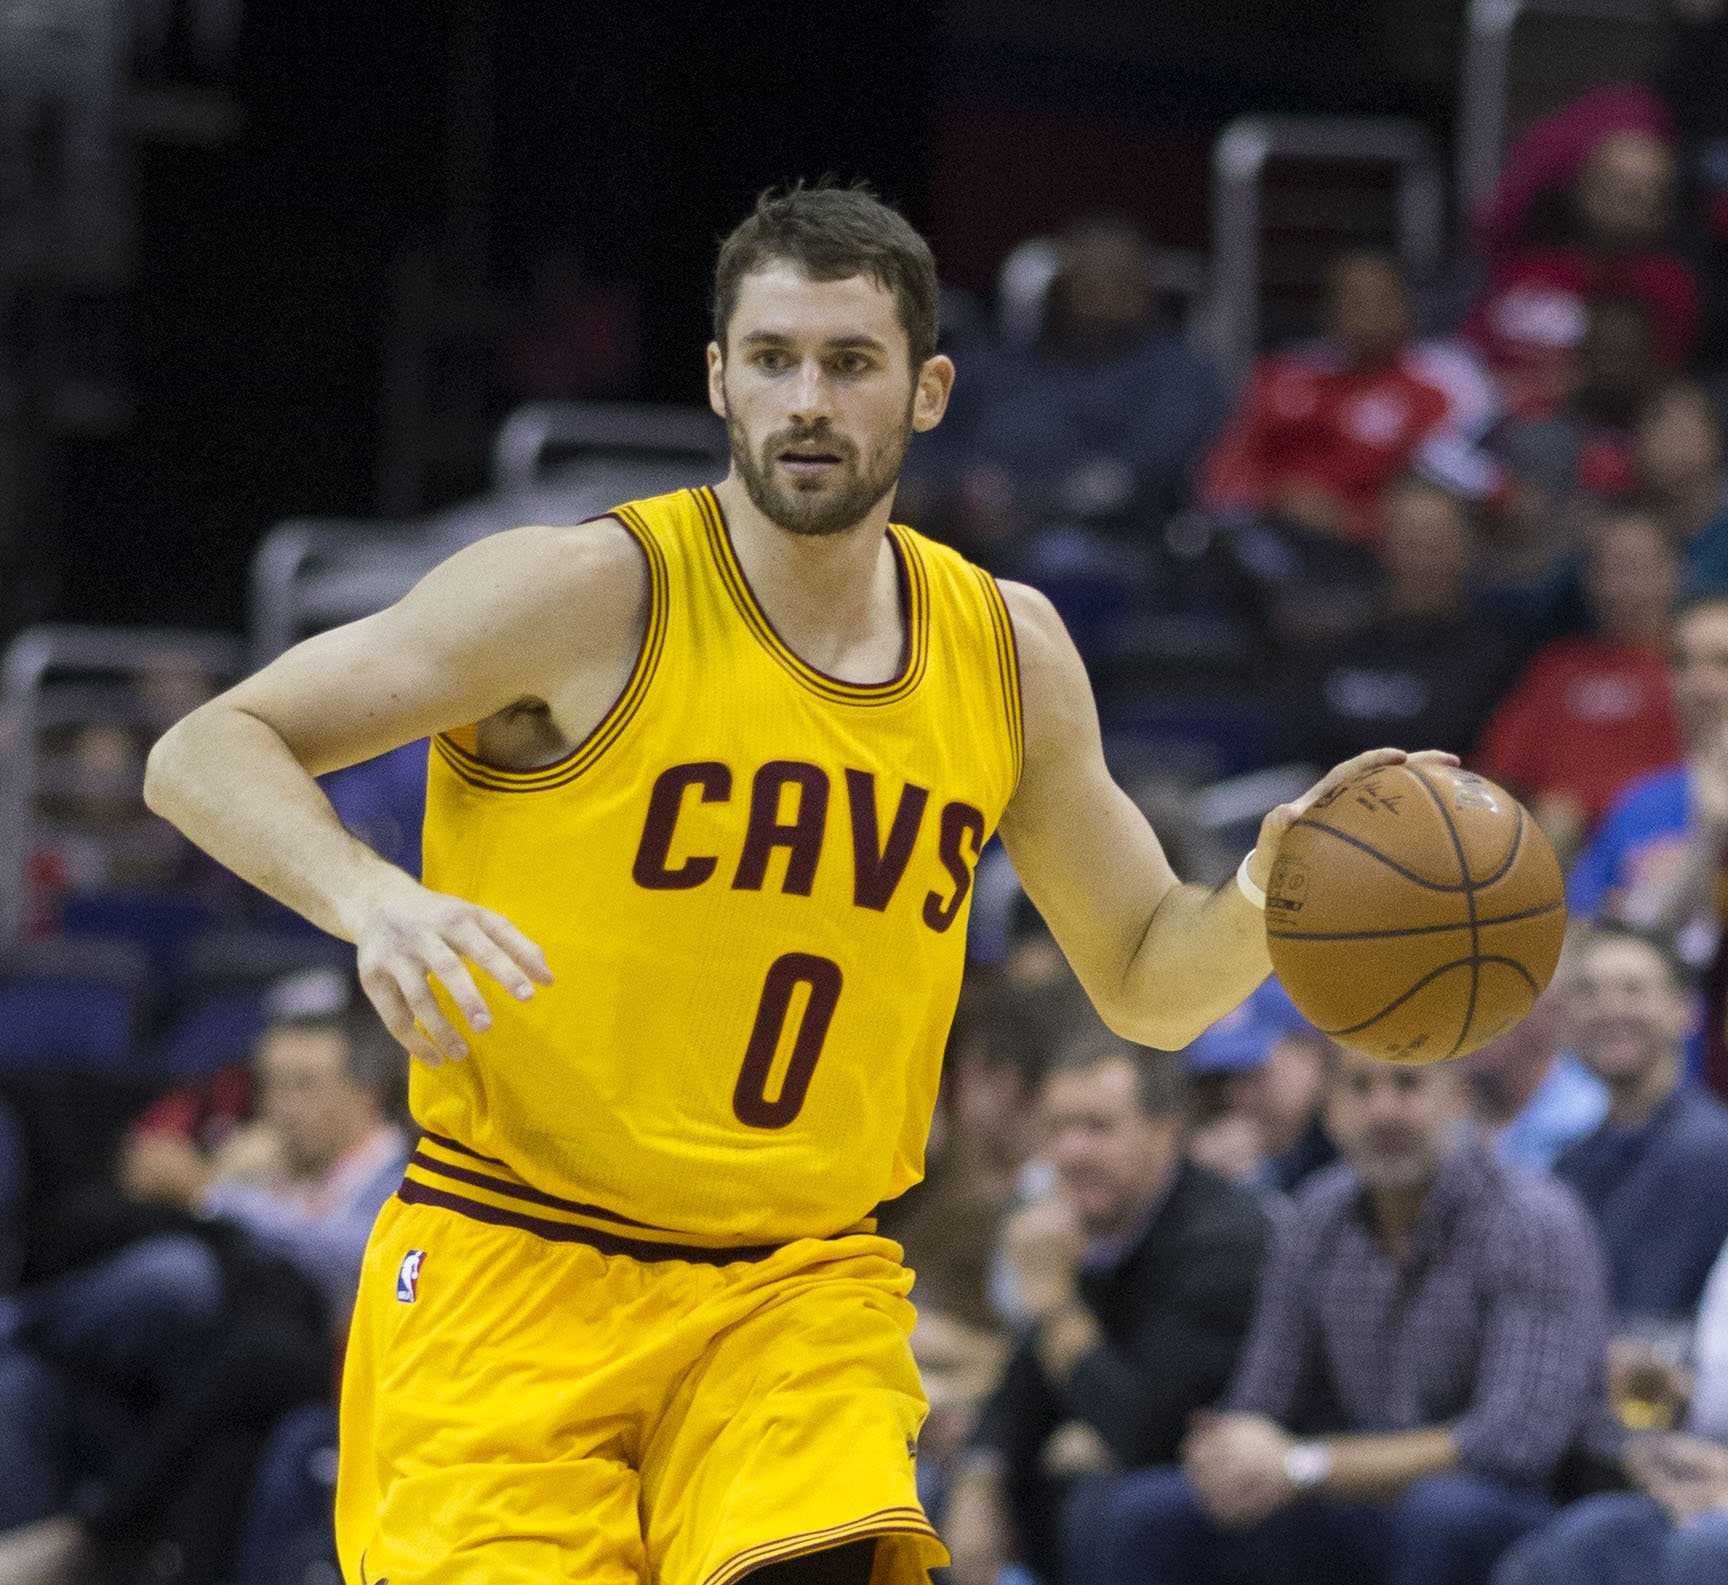 Kevin Love of the Cleveland Cavaliers in a game against the Washington Wizards at Verizon Center on November 21, 2014 in Washington, DC.| Photo: Keith Allison from Hanover, MD, USA, CC BY-SA 2.0, Wikimedia Commons